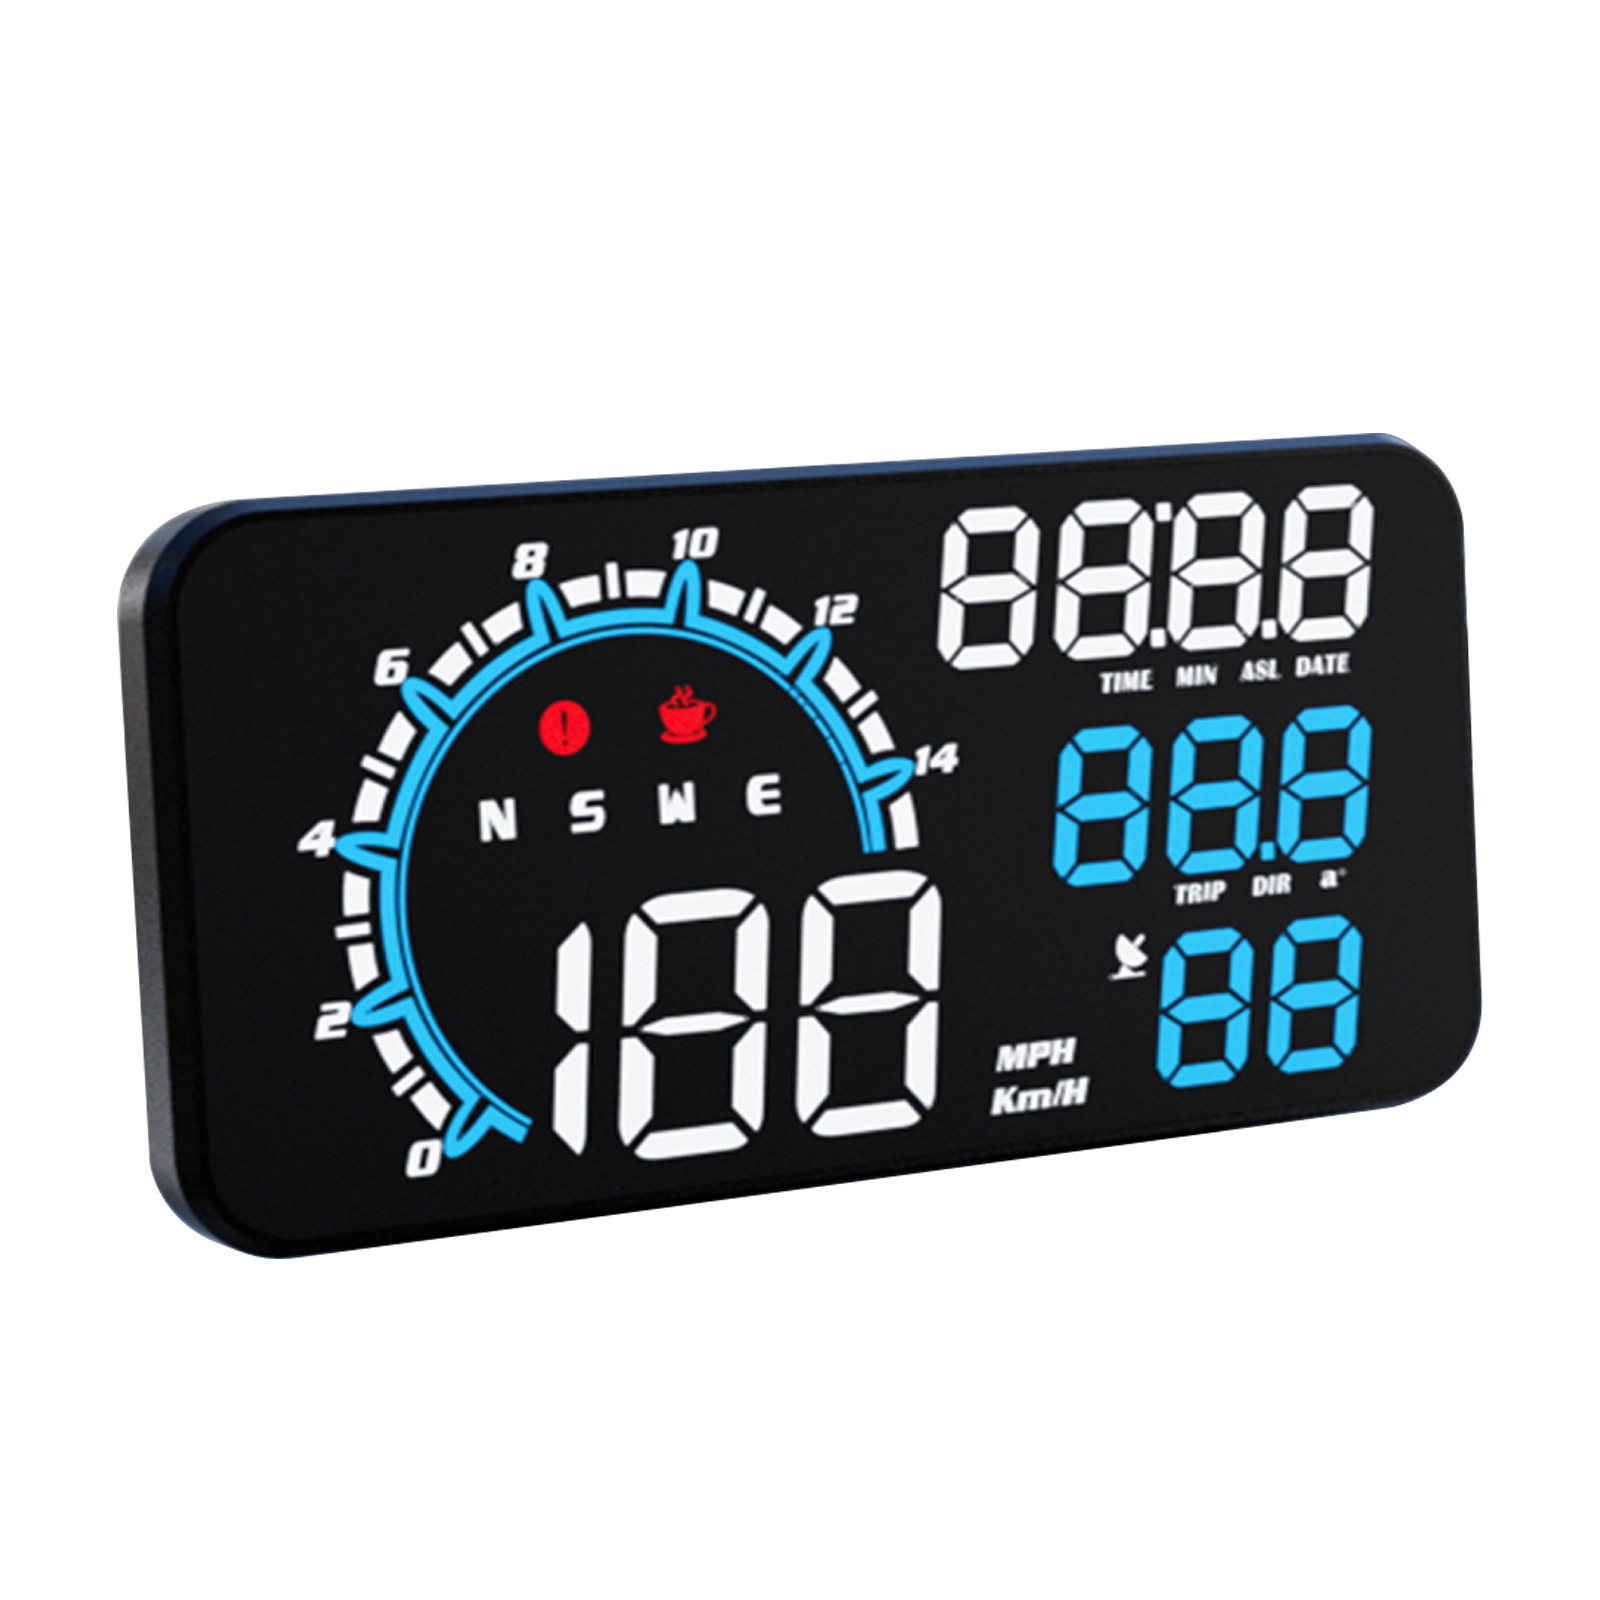 Car Hud Head up Display 5.5-Inch Large Screen Universal USB Gps Speed Instrument with Overspeed Alarm